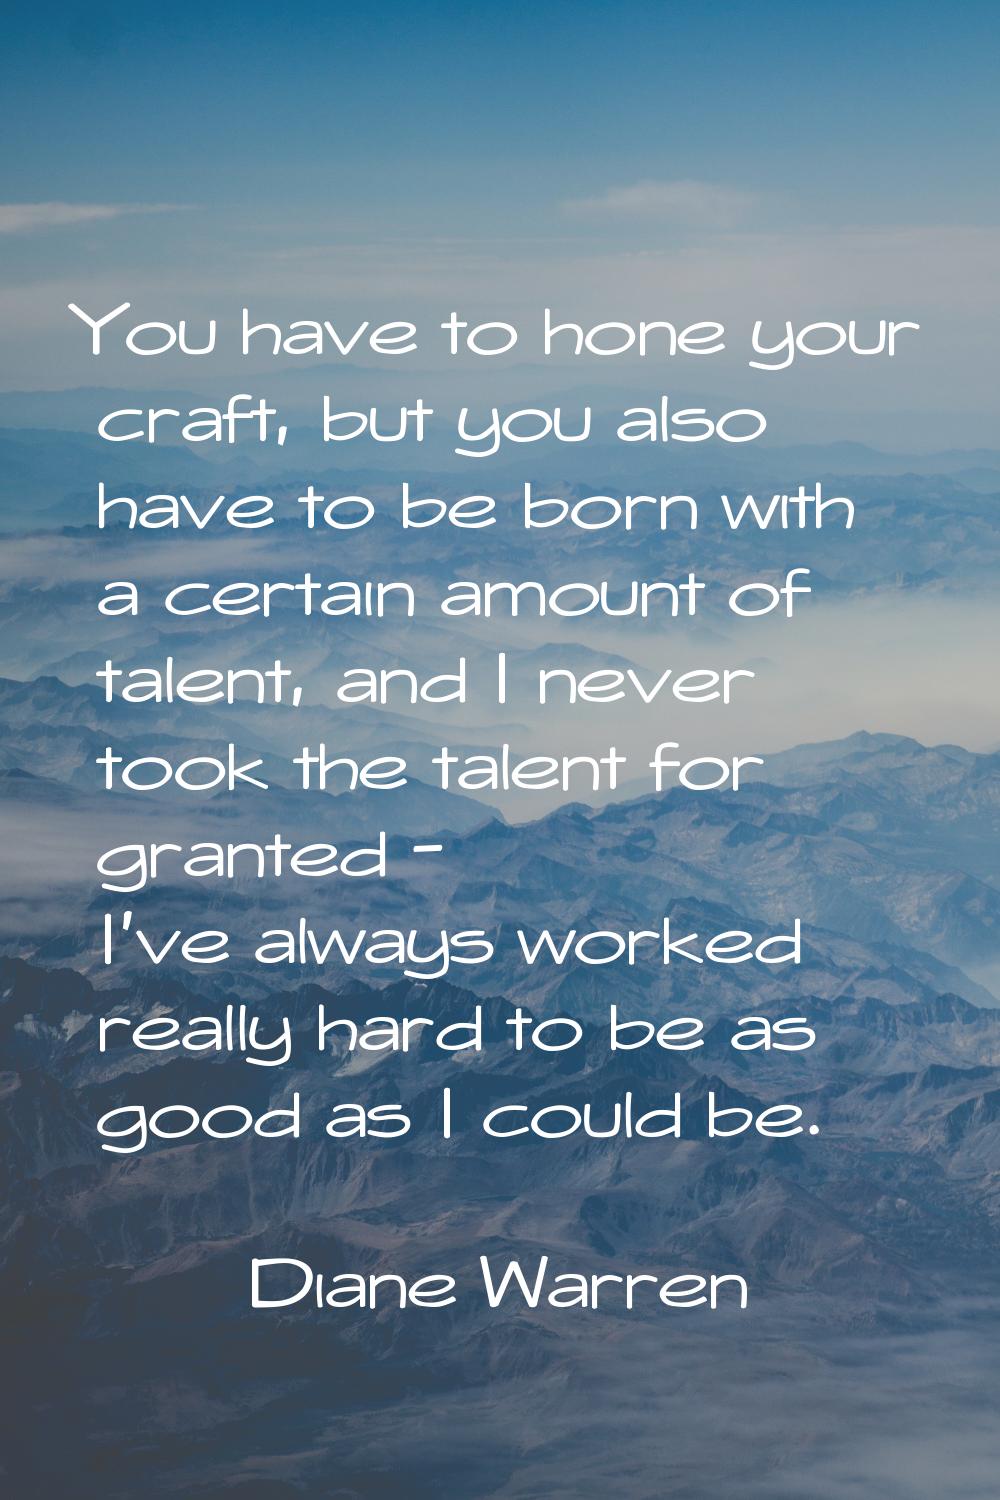 You have to hone your craft, but you also have to be born with a certain amount of talent, and I ne